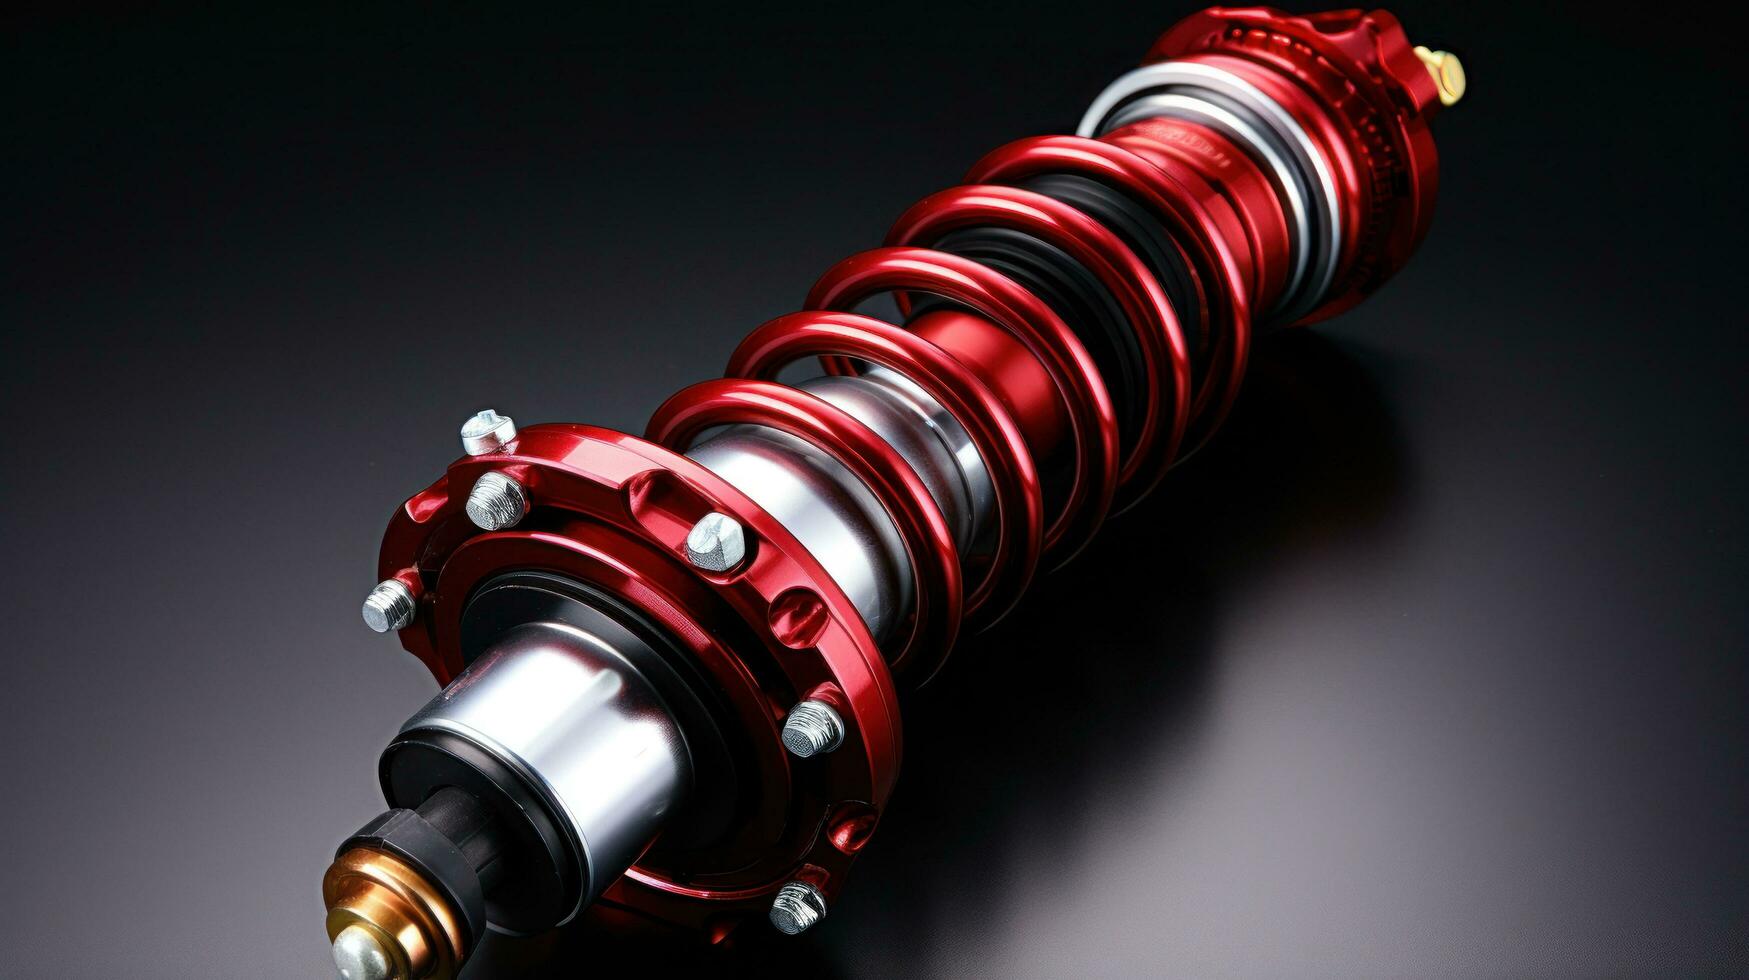 Automobile shock absorber with spring assembly photo